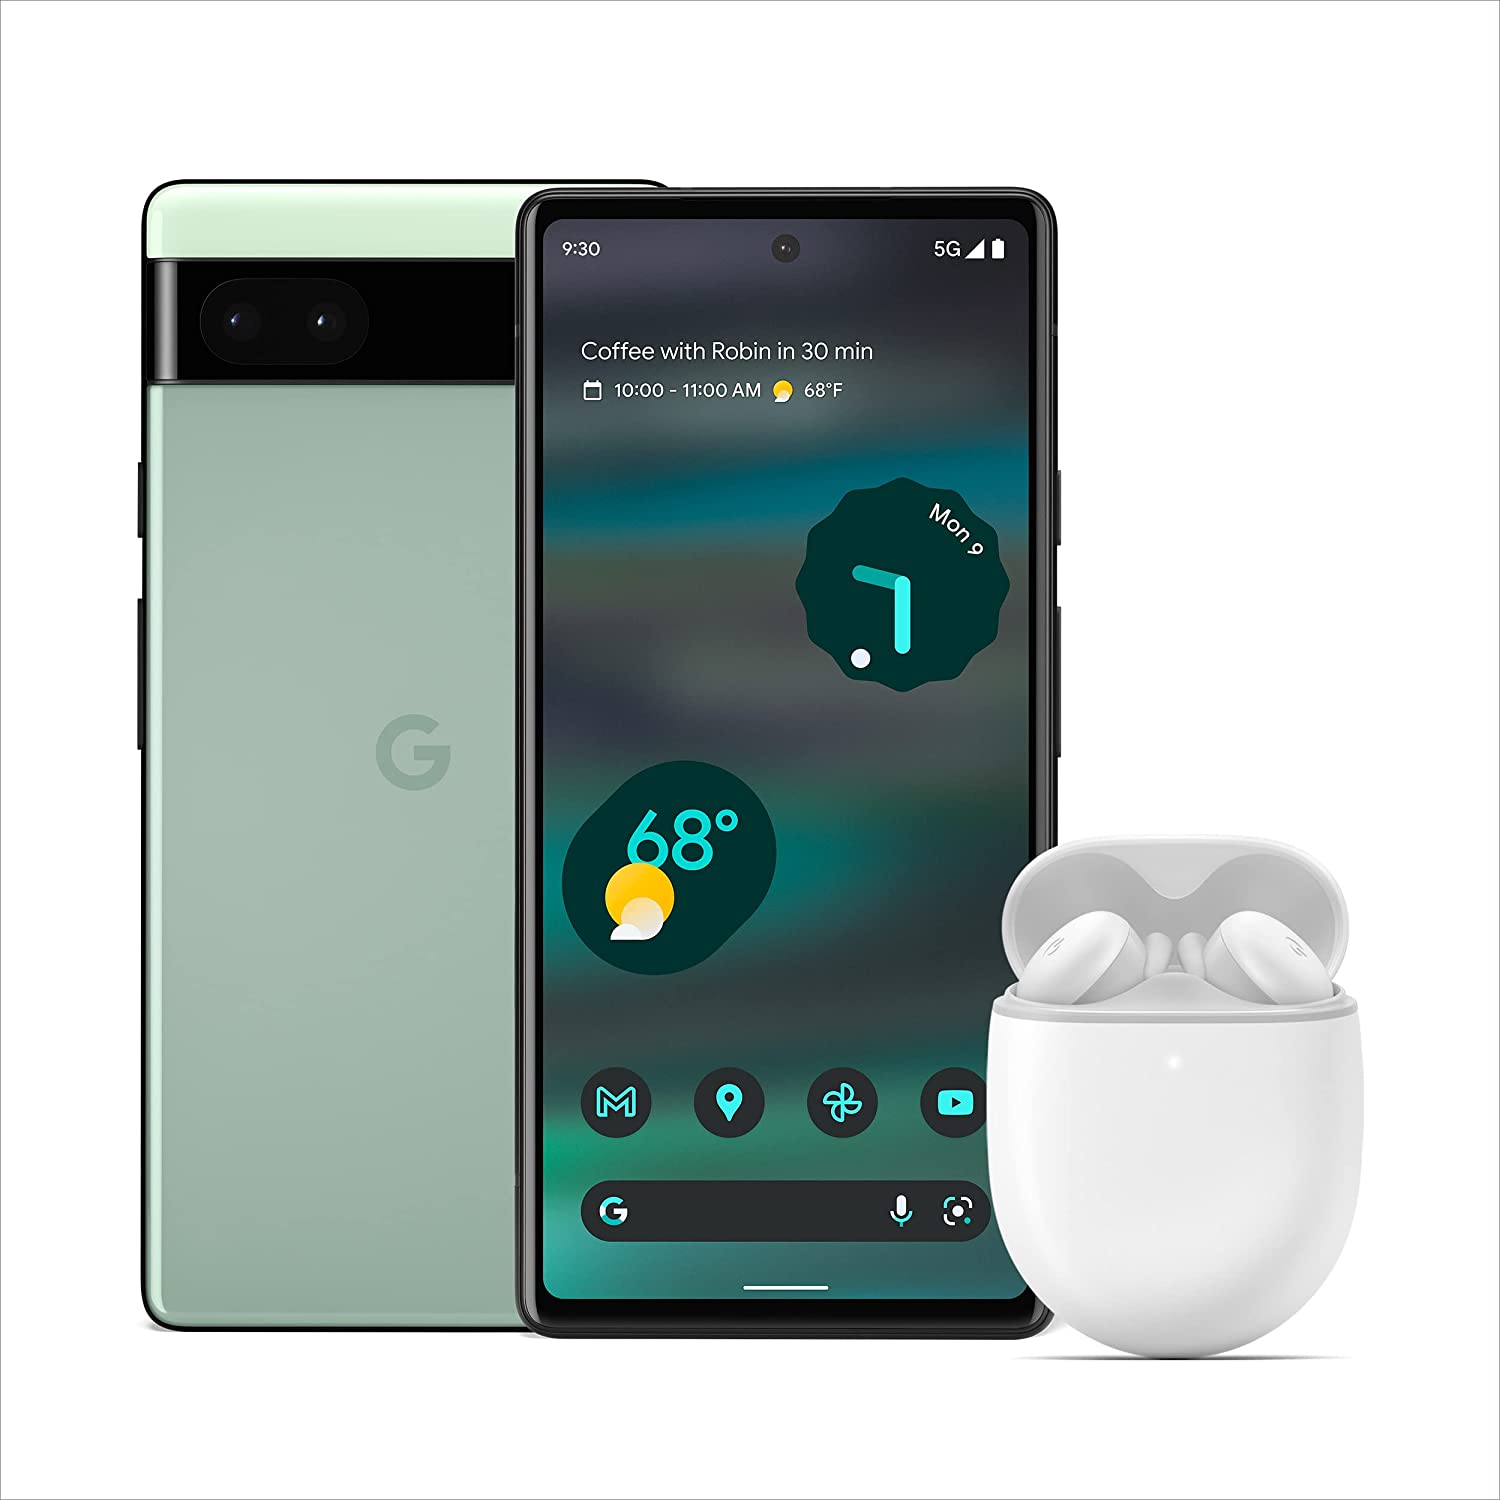 This image shows the Google Pixel 6A with Google Pixel Buds A.